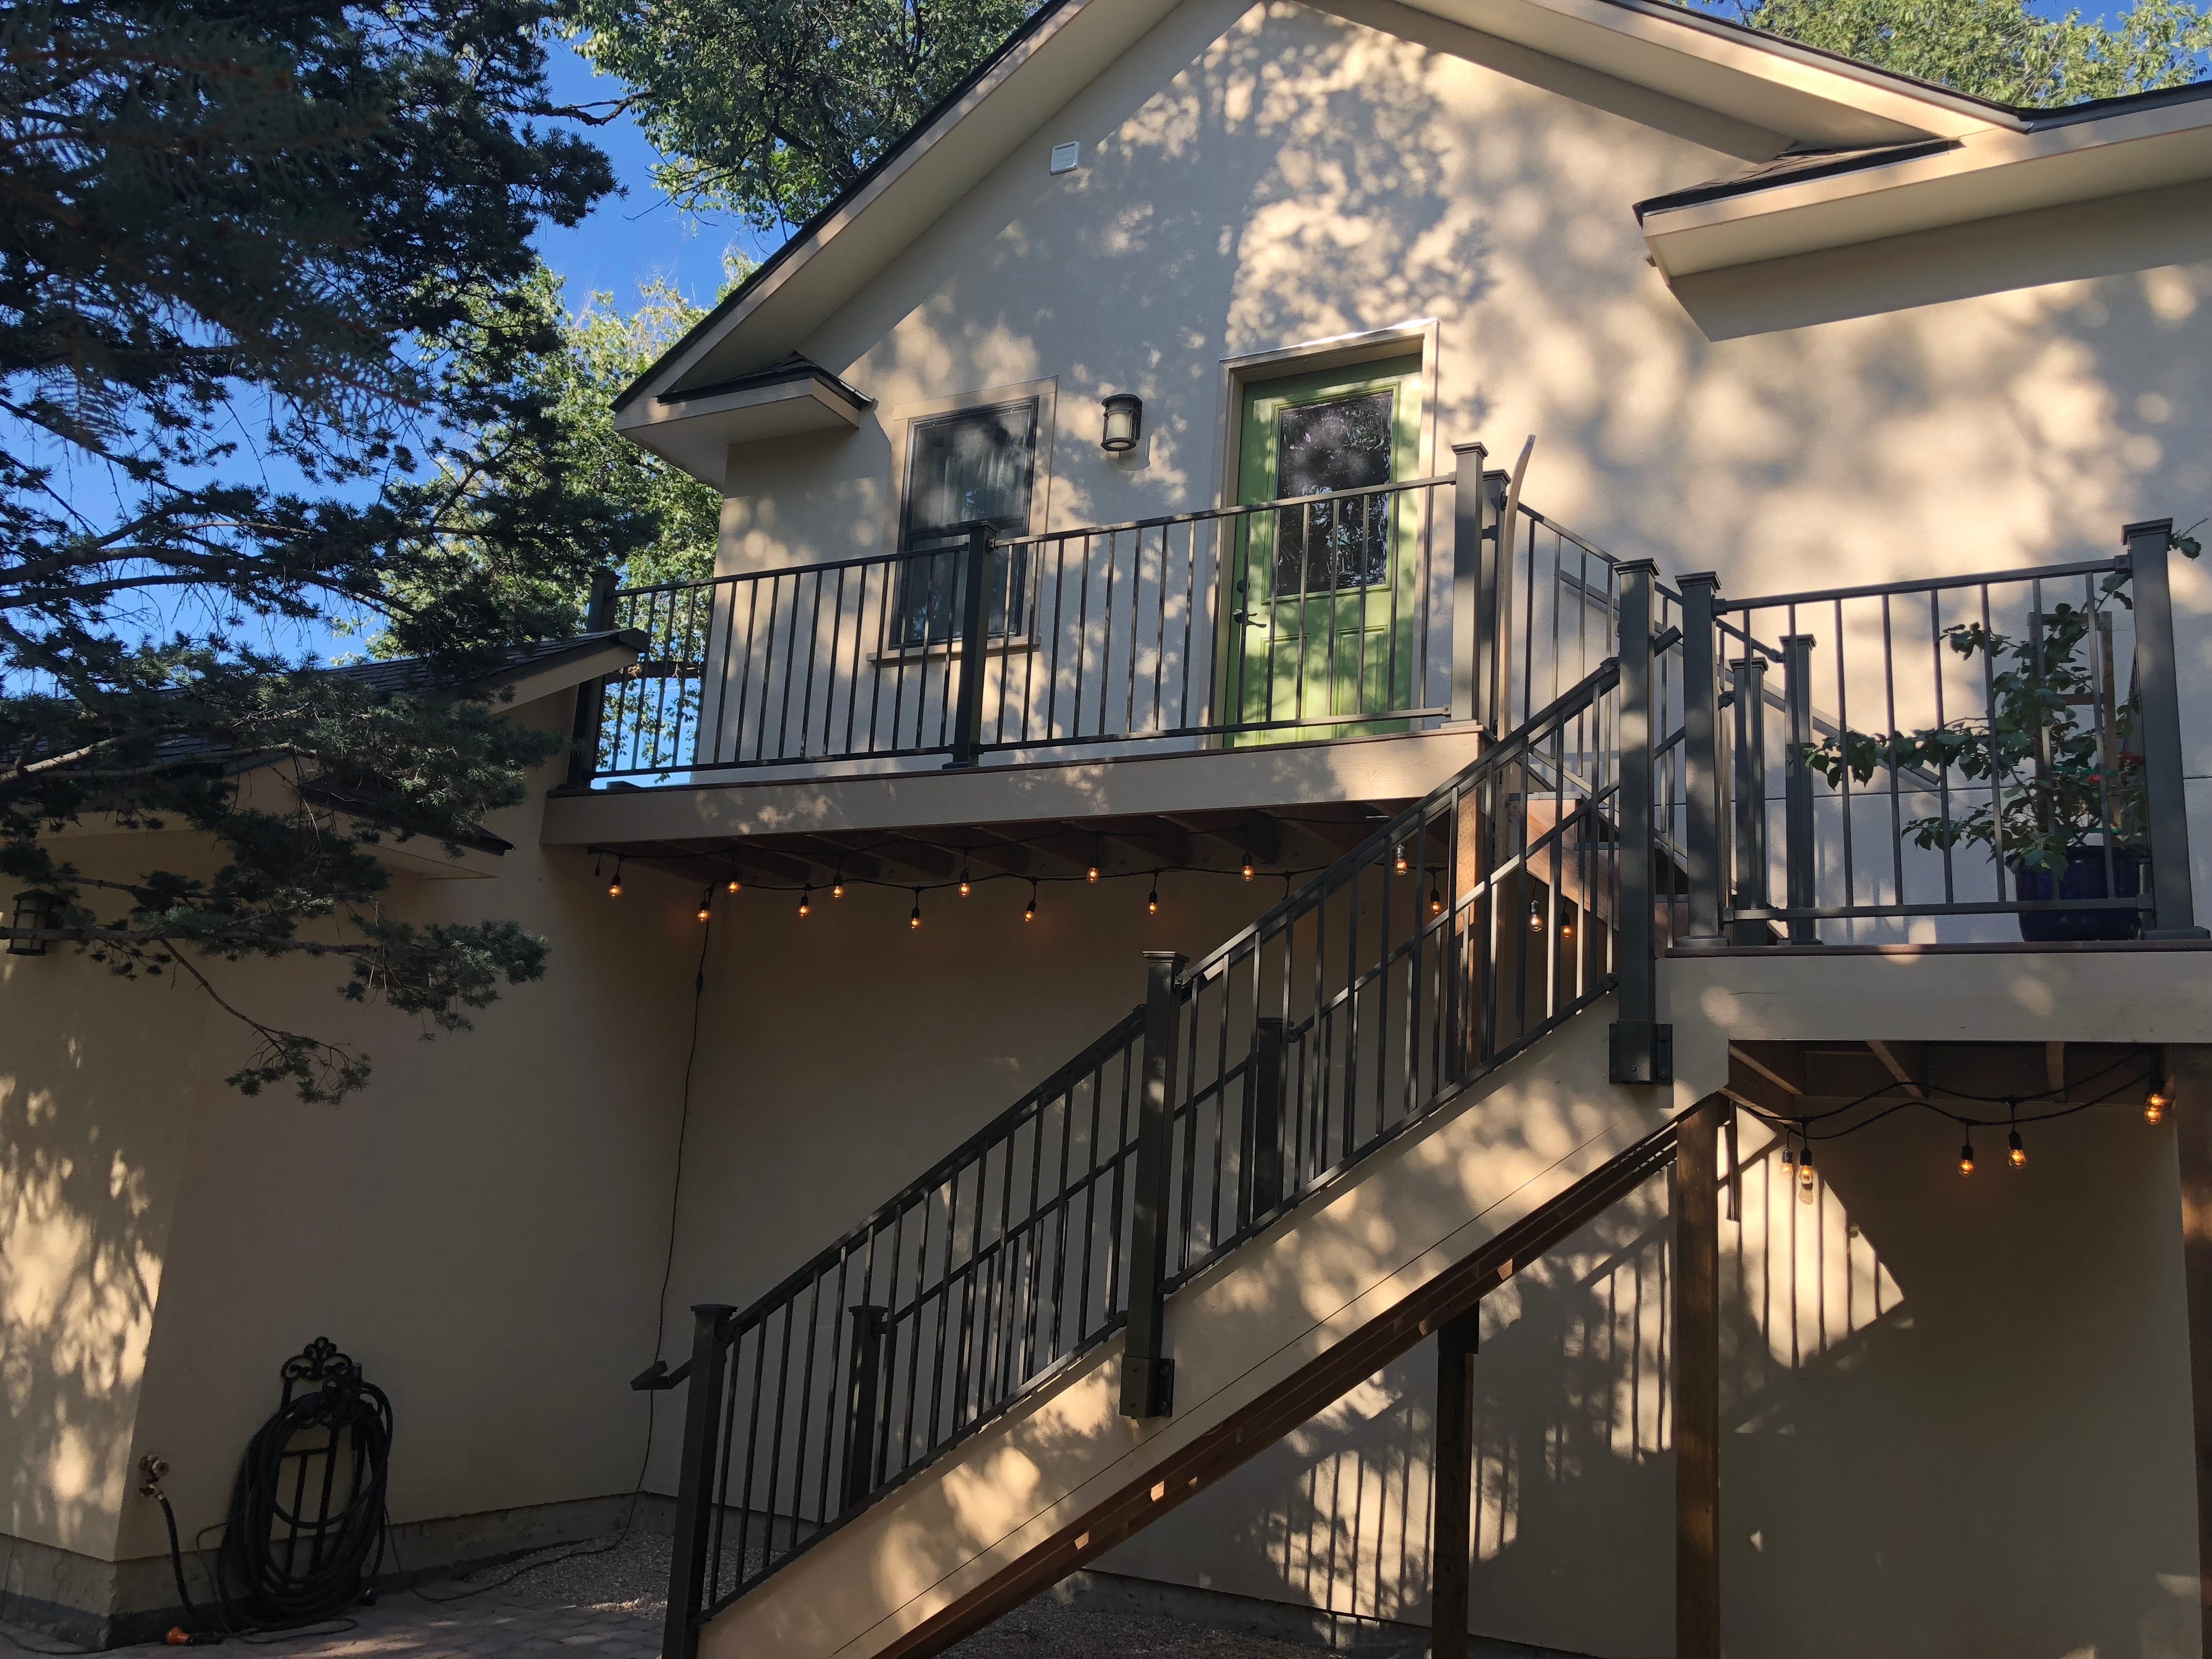 Treehouse Casita Guesthouses For Rent In Colorado Springs